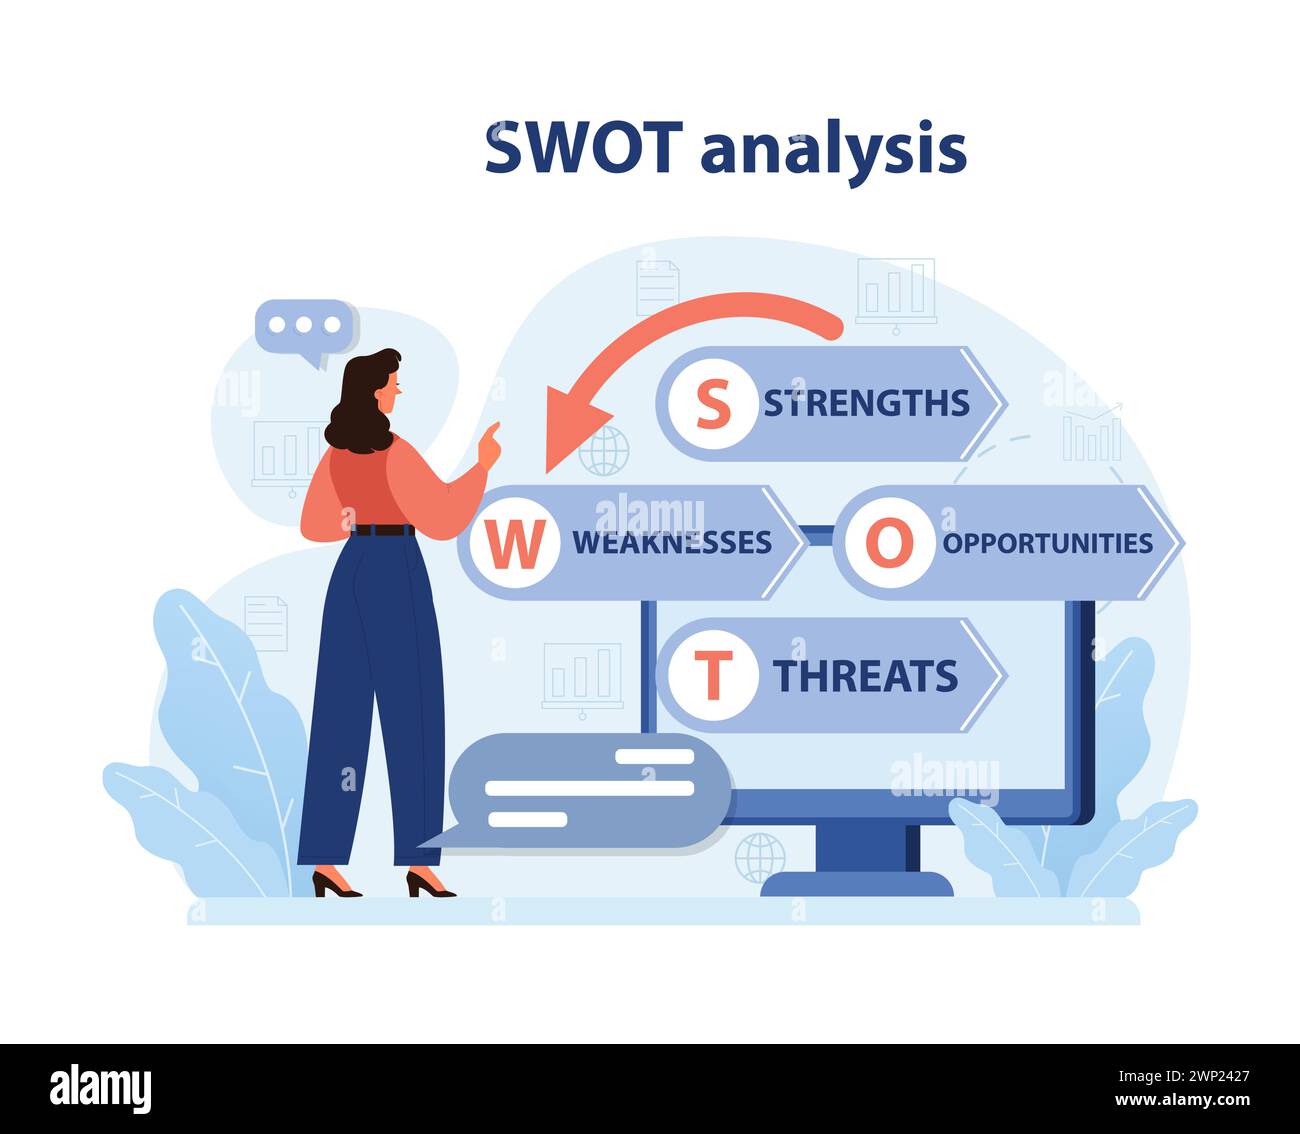 Professional woman guiding a SWOT analysis. Evaluating strengths, weaknesses, opportunities, and threats for market penetration. Business assessment tool. Flat vector illustration Stock Vector